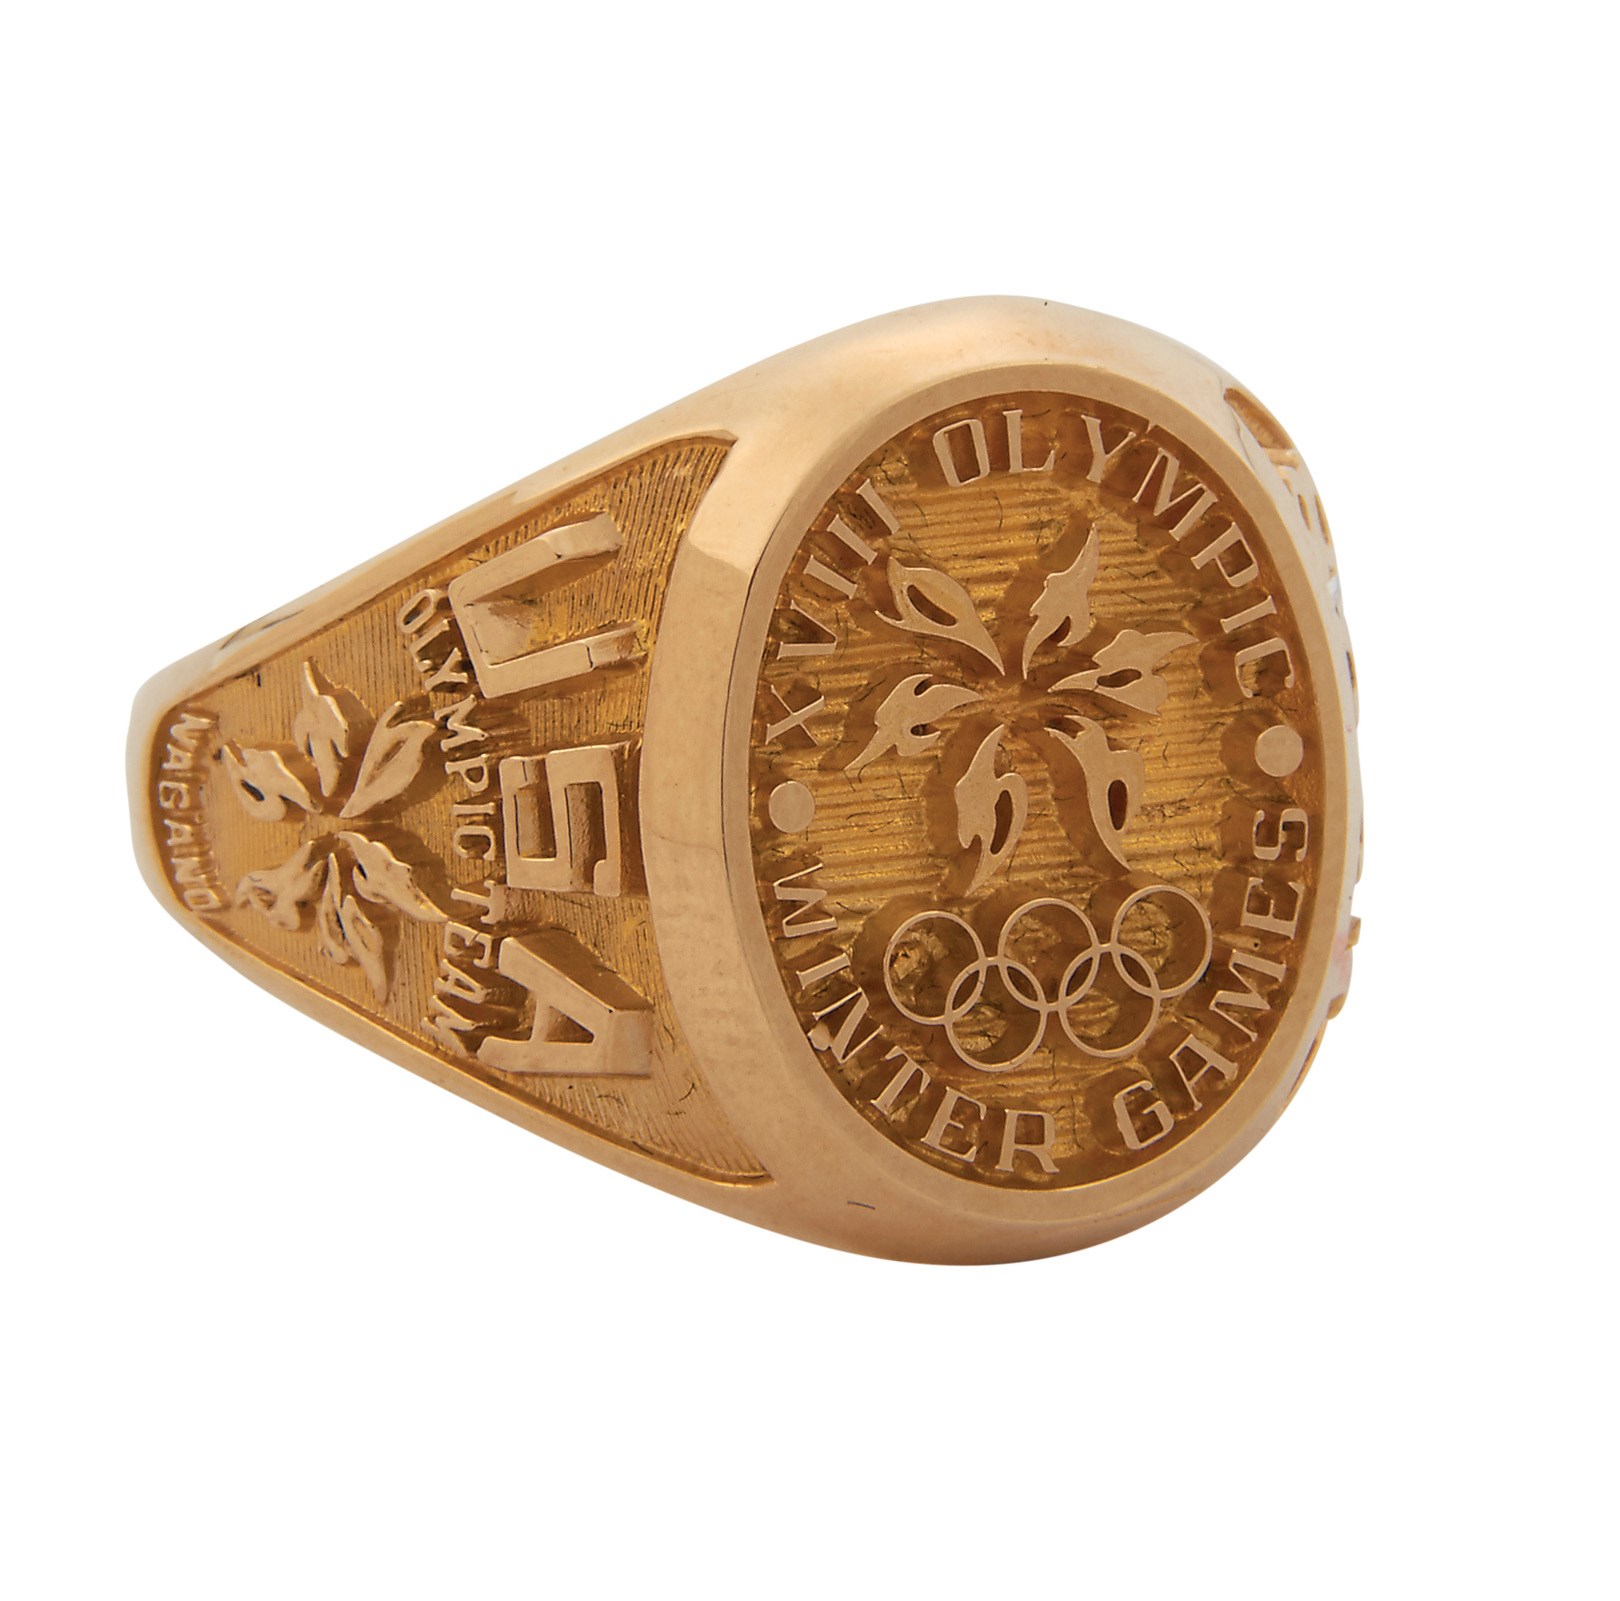 The Art Berglund USA Hockey Collection - 1998 USA Olympic Men's Ice Hockey Participation Ring Presented to Art Berglund